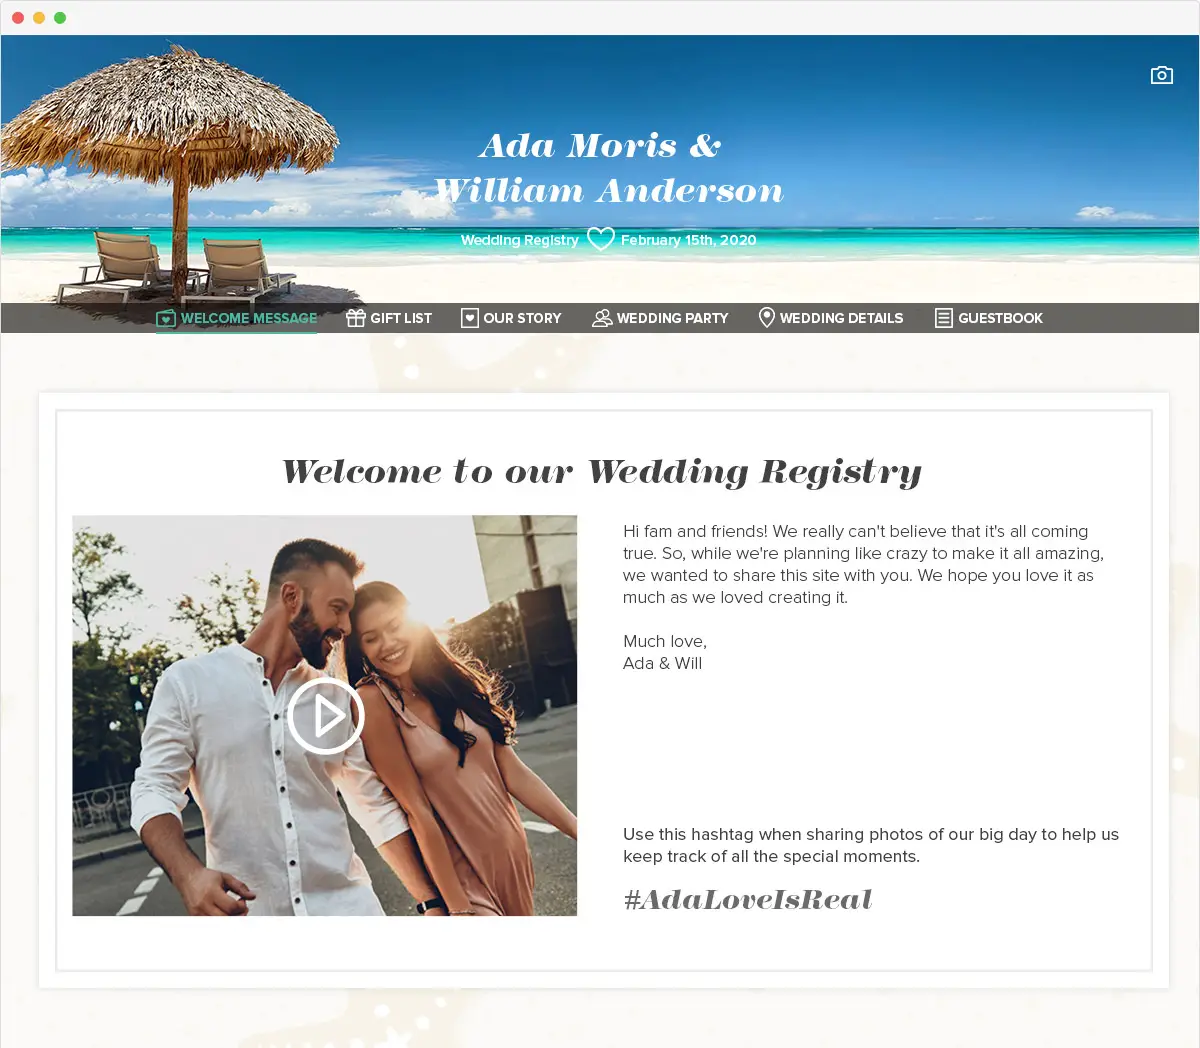 Free Wedding Website: Build a Custom Site for Your Big Day